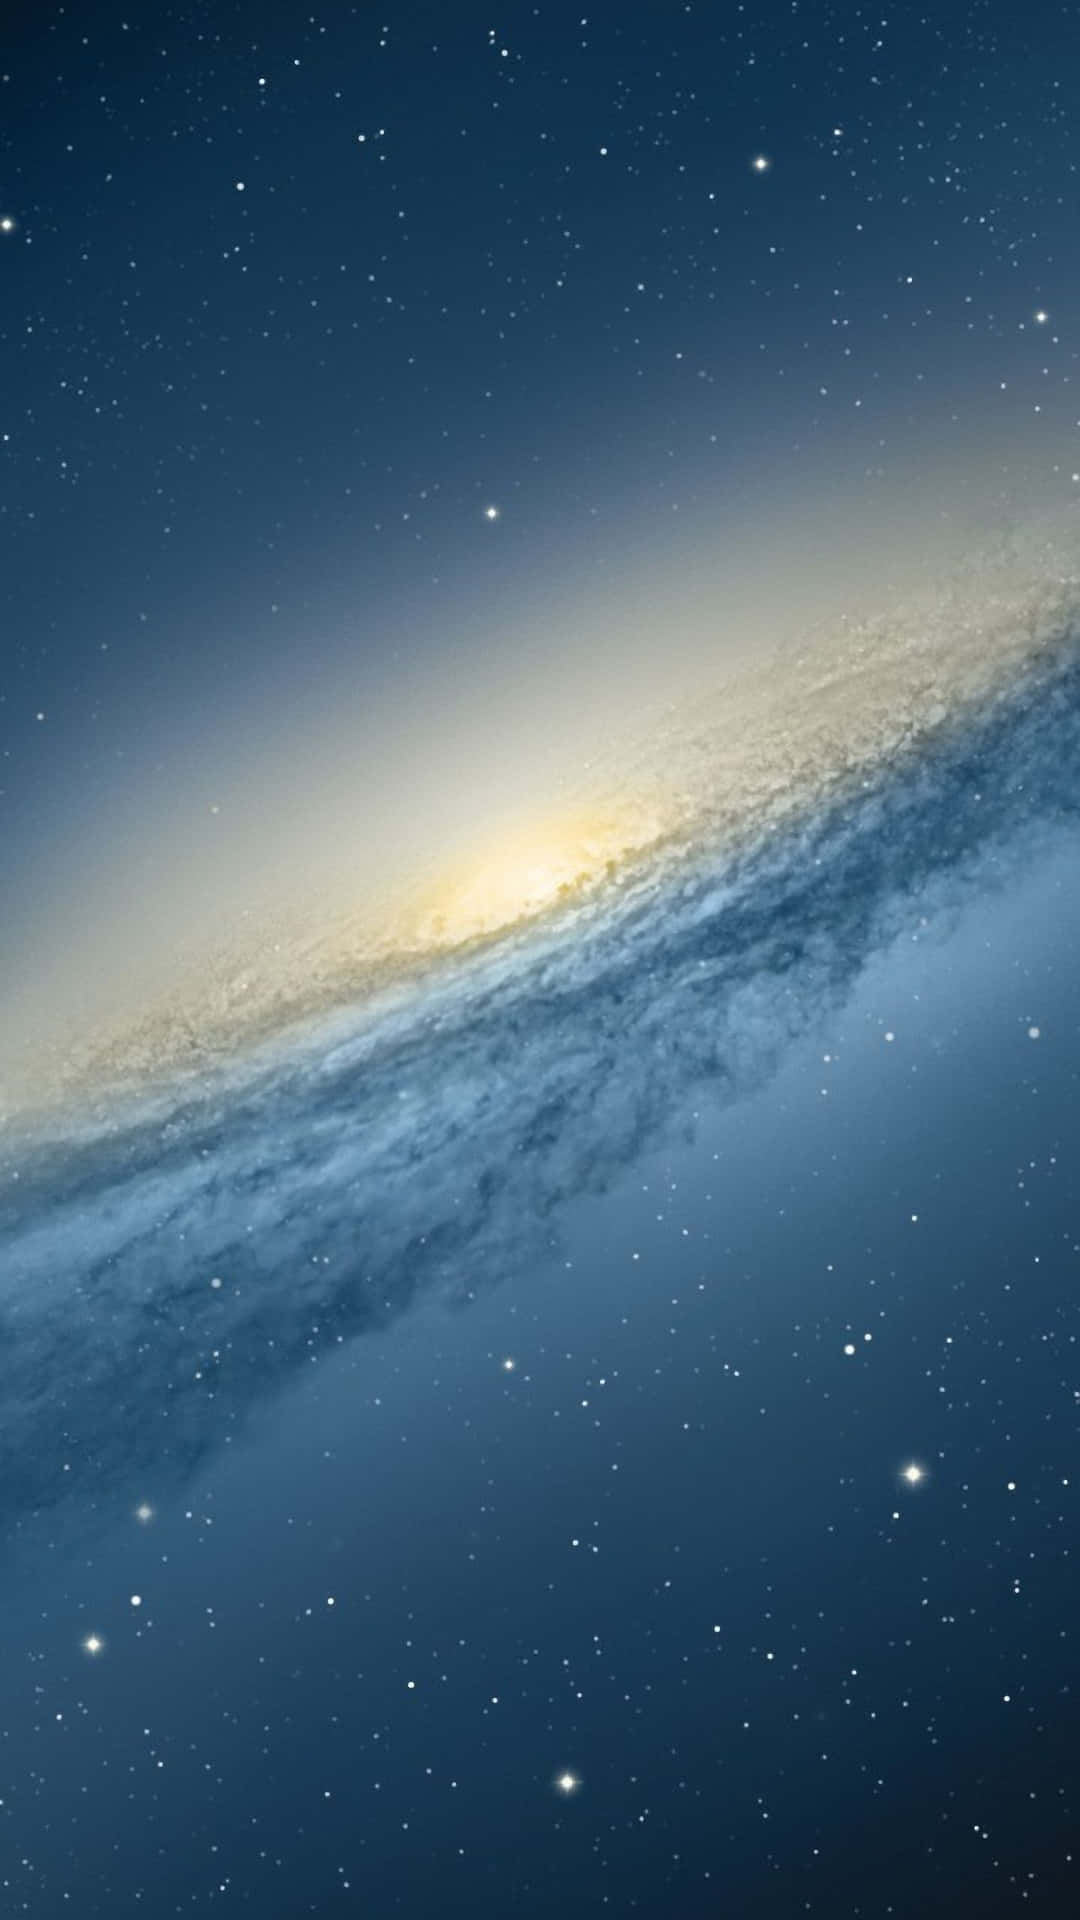 Galaxy Wallpaper - Galaxy Wallpapers Background